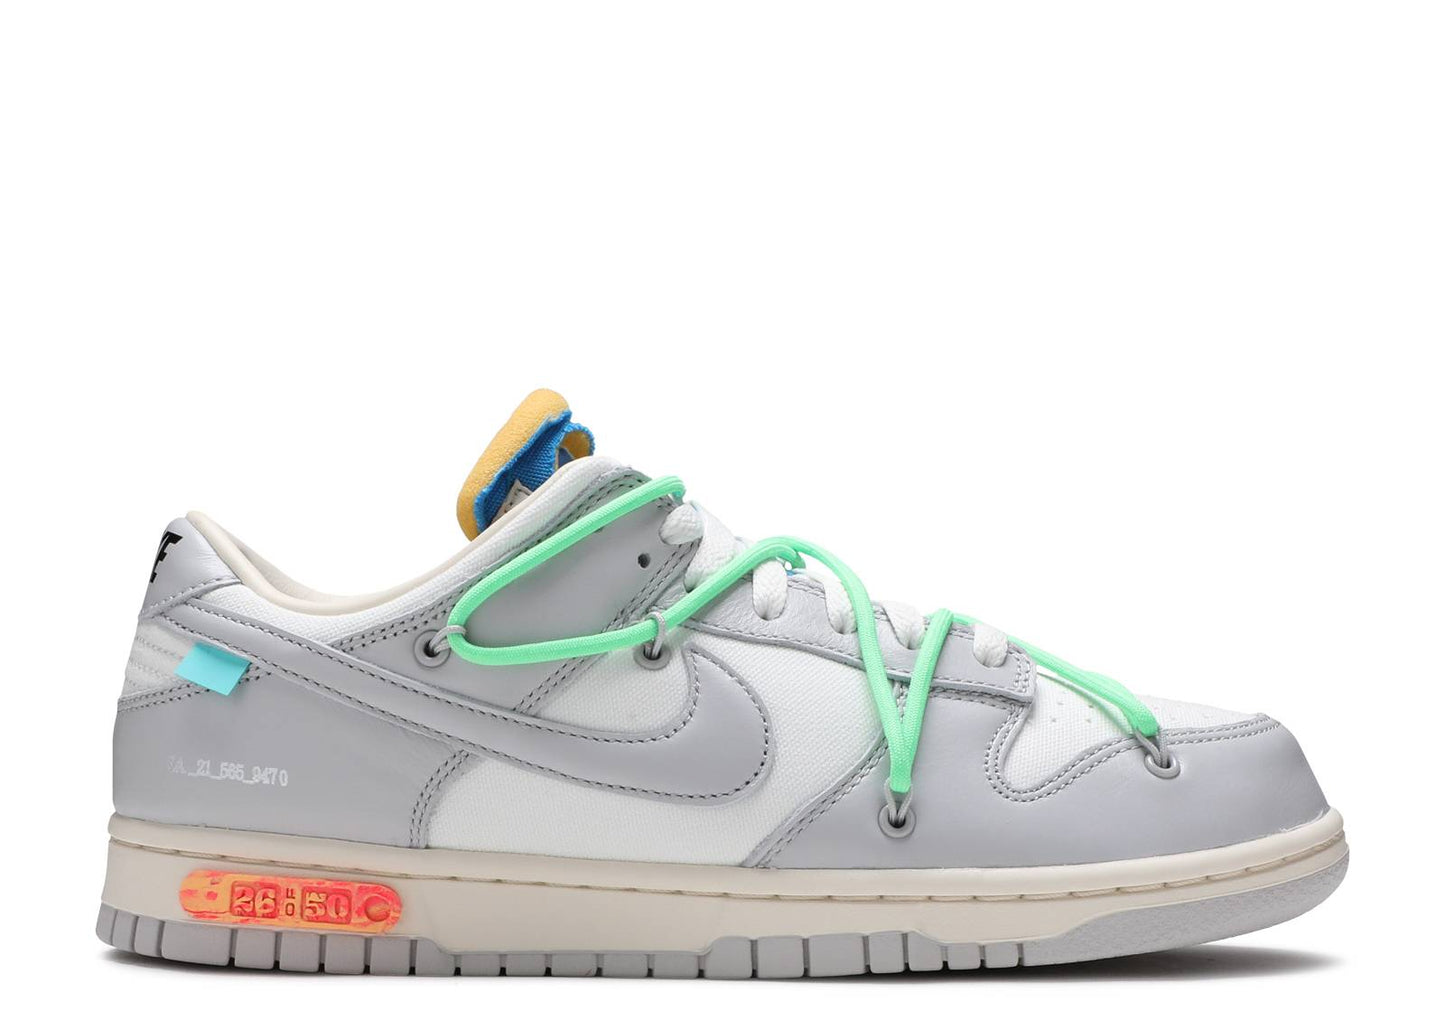 Off-White x Nike Dunk Low "Dear Summer - Lot 26 of 50"